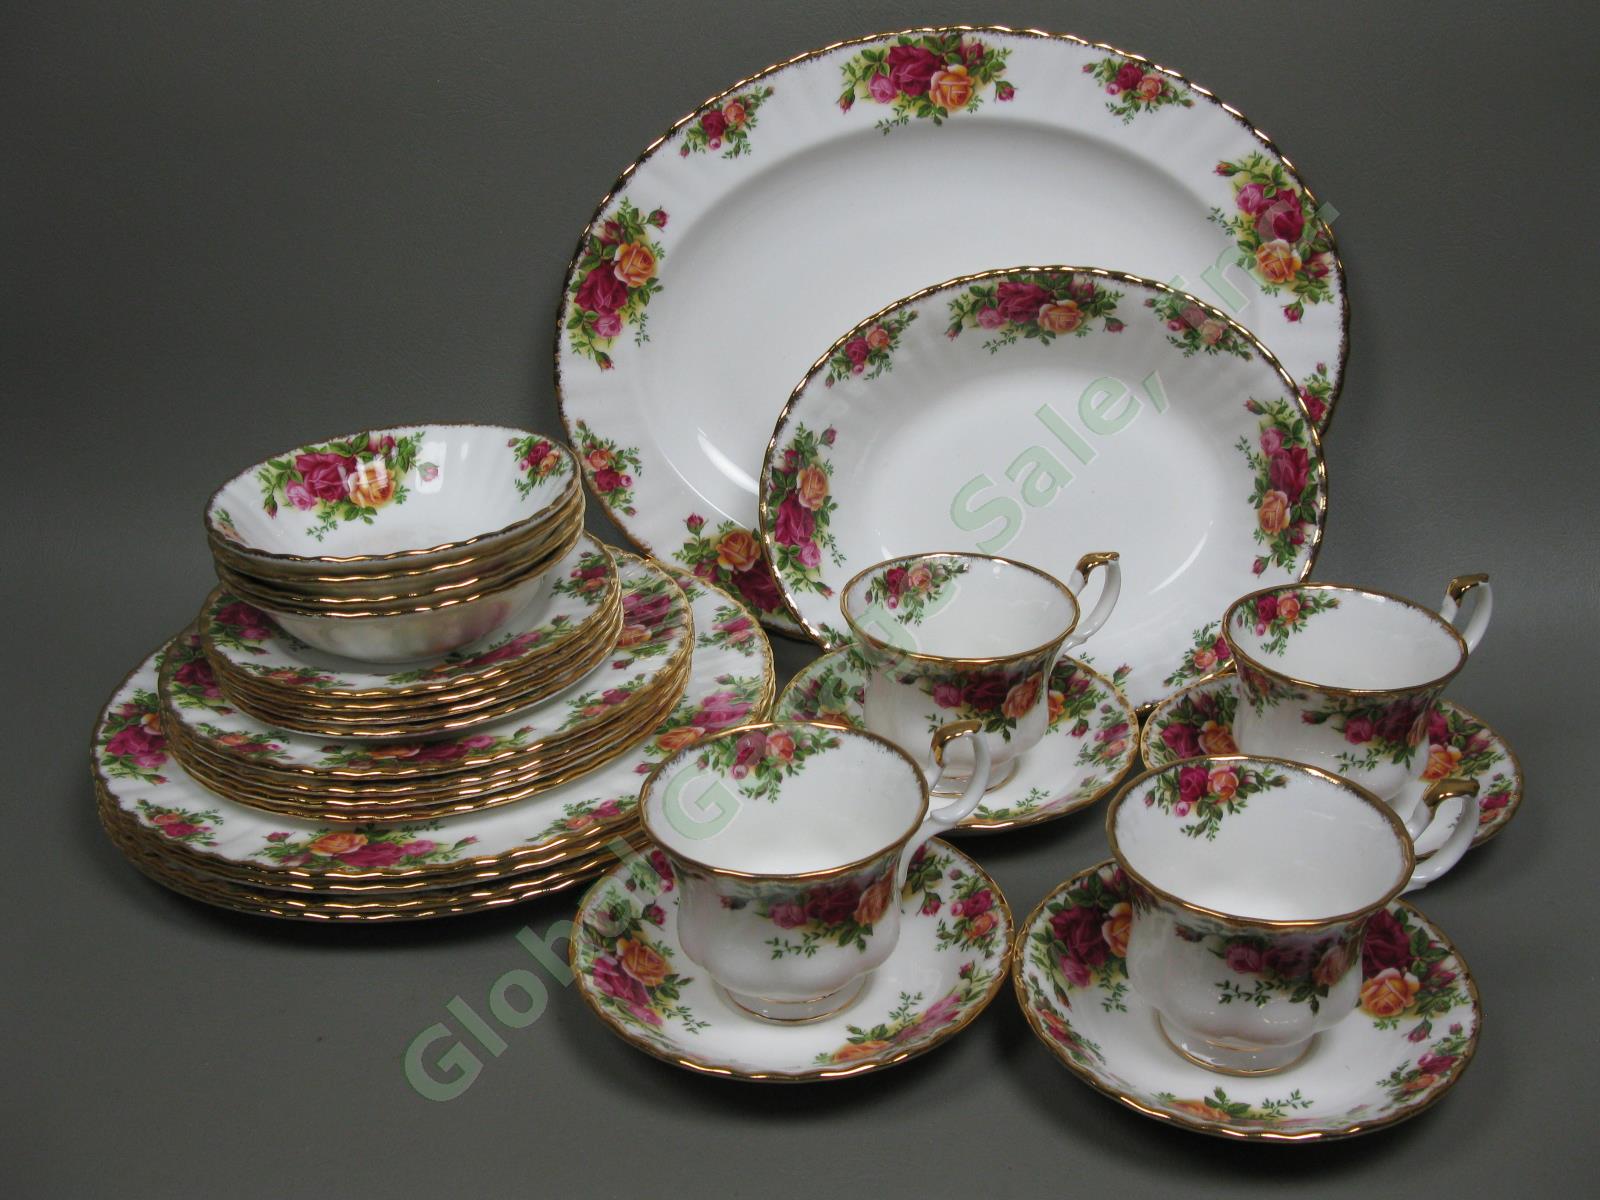 4 Royal Albert Old Country Roses Place Settings Serving Bowl Platter Plate Set